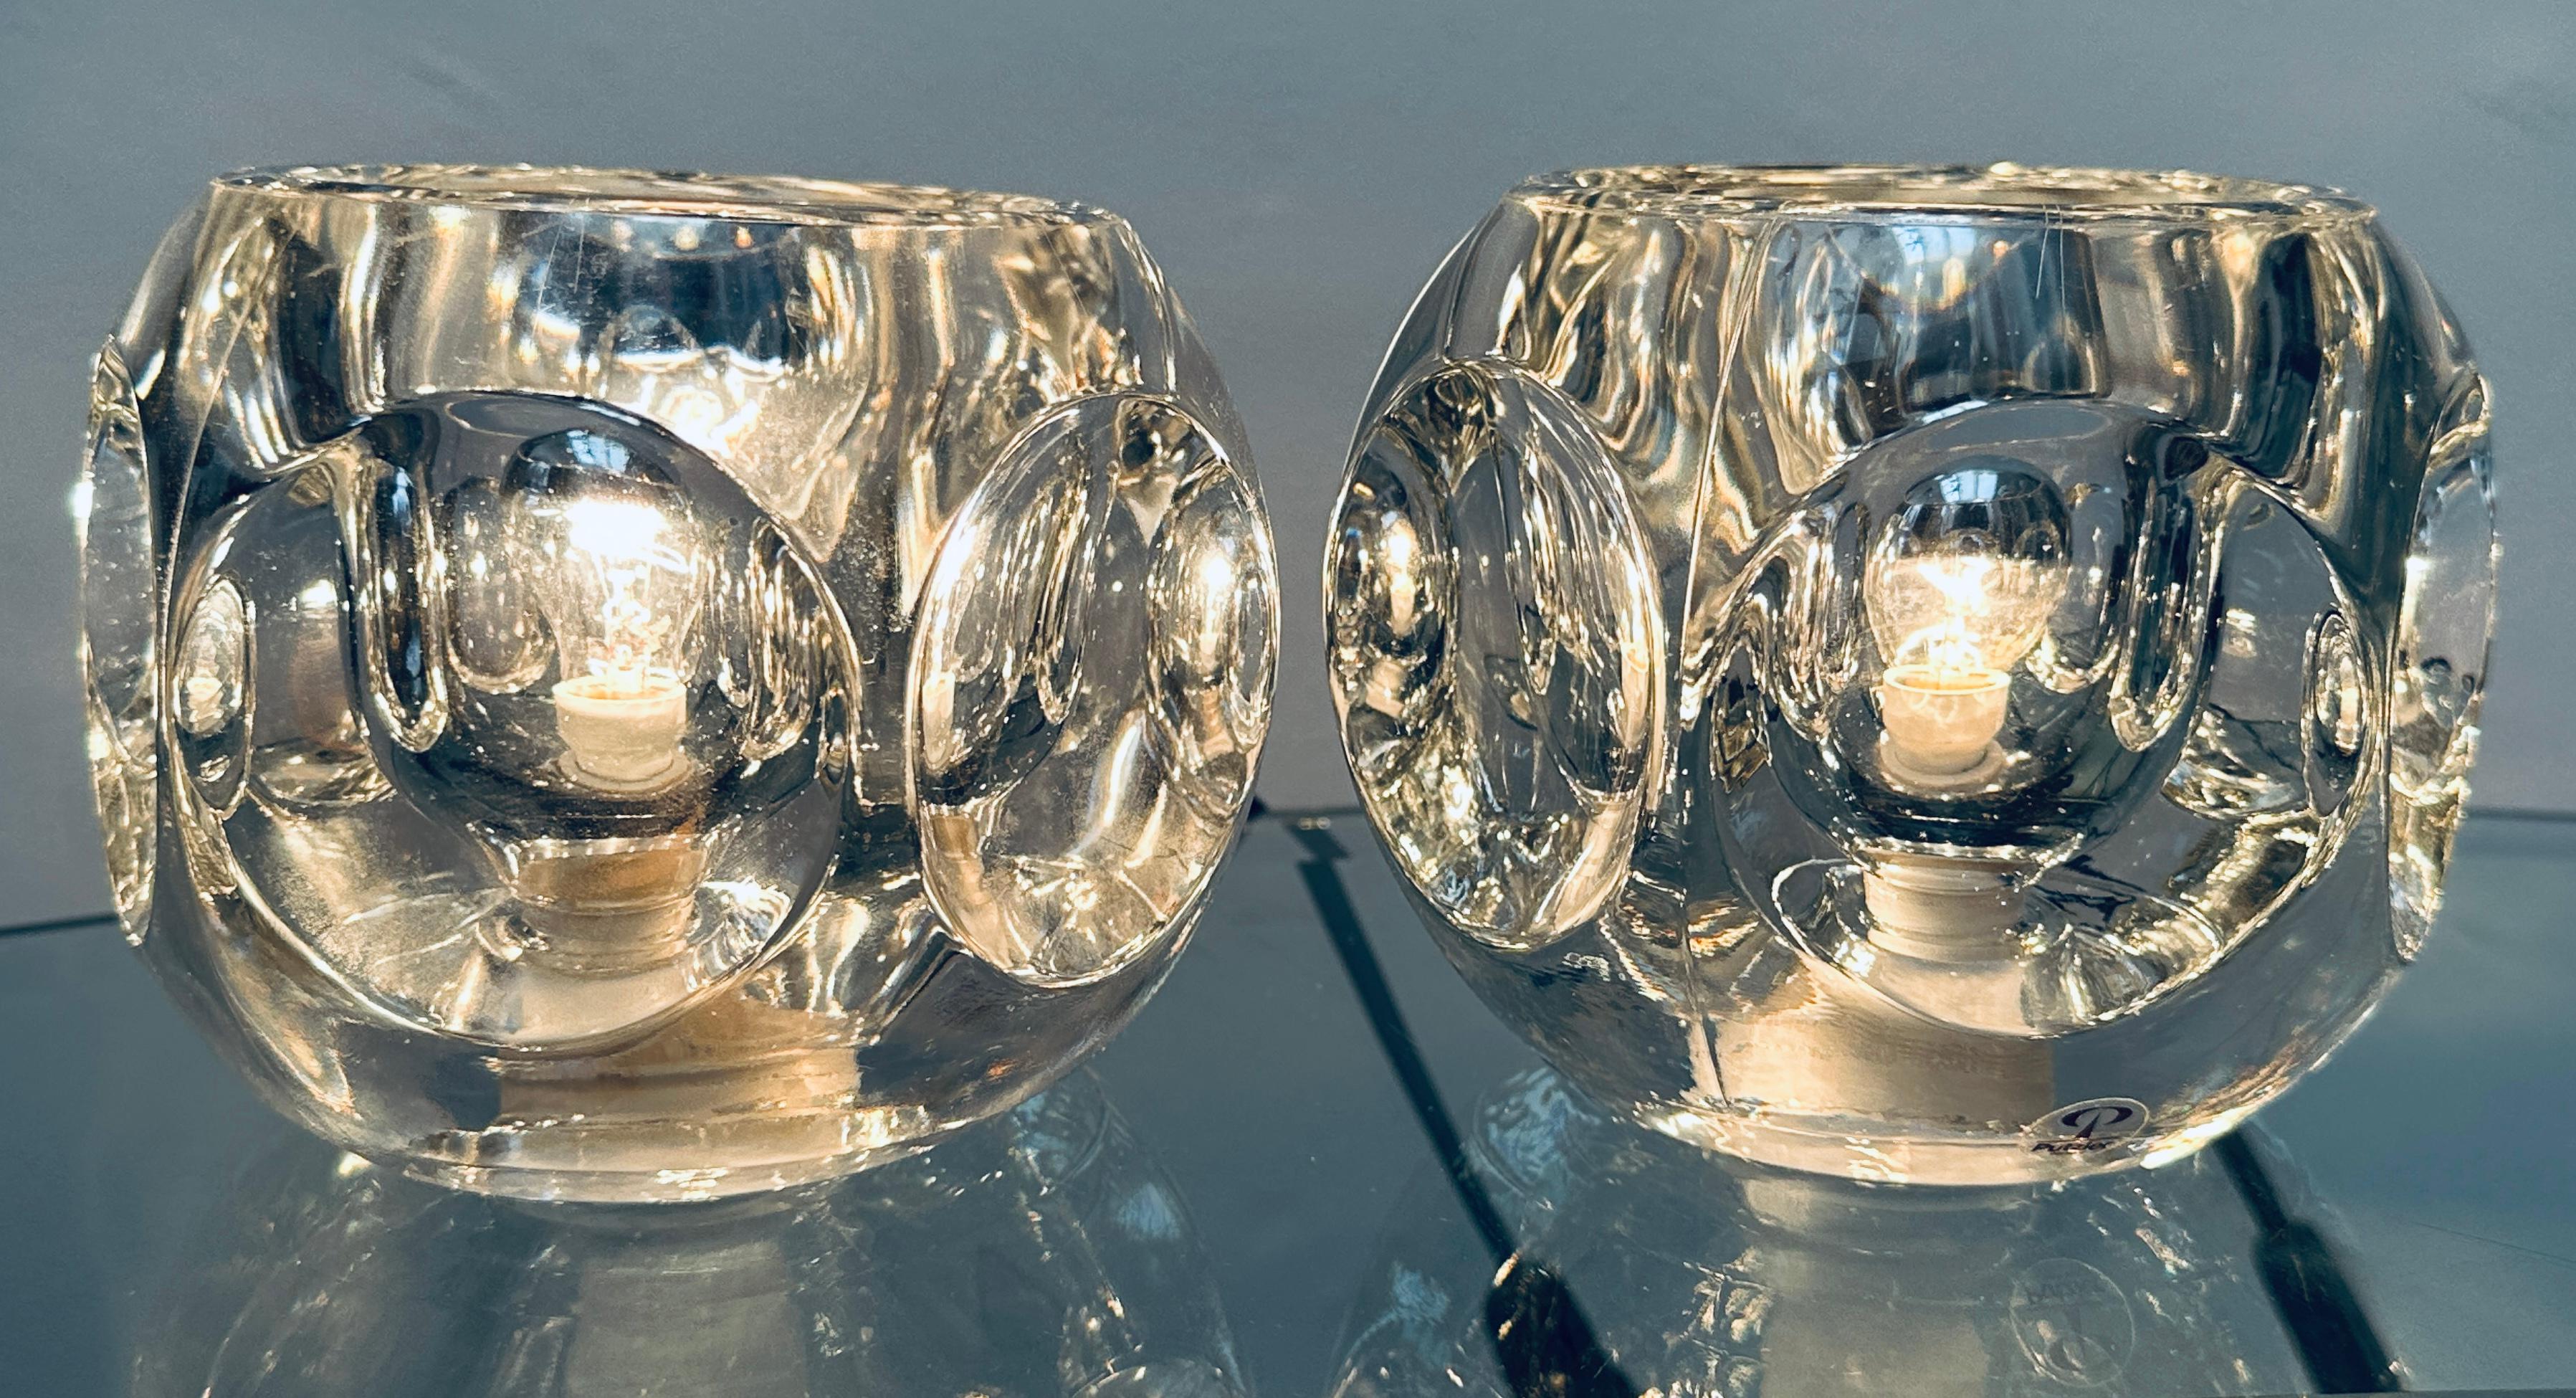 Pair of 1970s German Peill and Putzler round clear glass table lights with six concave indentations around the outside which magnify and reflect the light beautifully casting shadows around it and on the wall. An on/off switch is fitted onto their